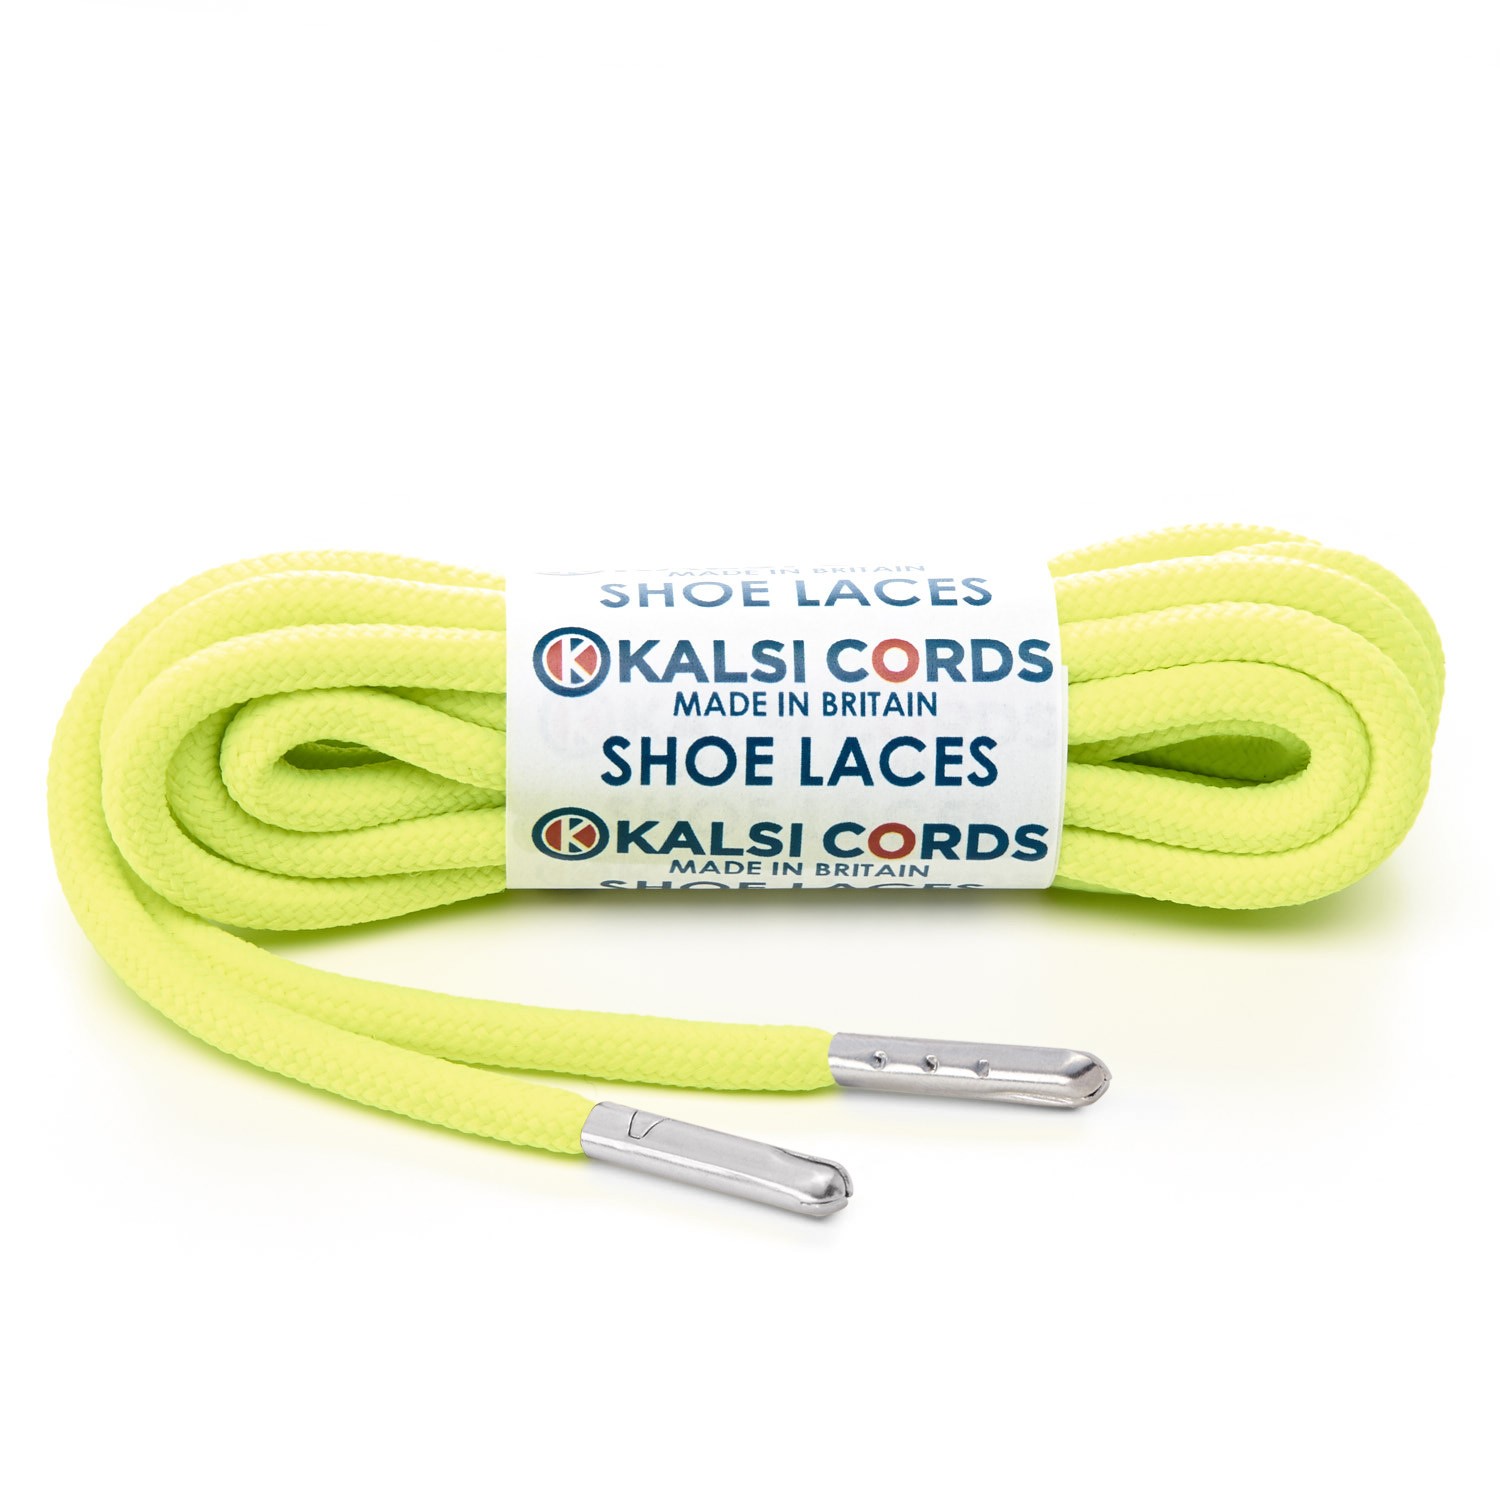 T621 5mm Round Polyester Shoe Laces Fluorescent Yellow 1 Silver Metal Tip Kalsi Cords